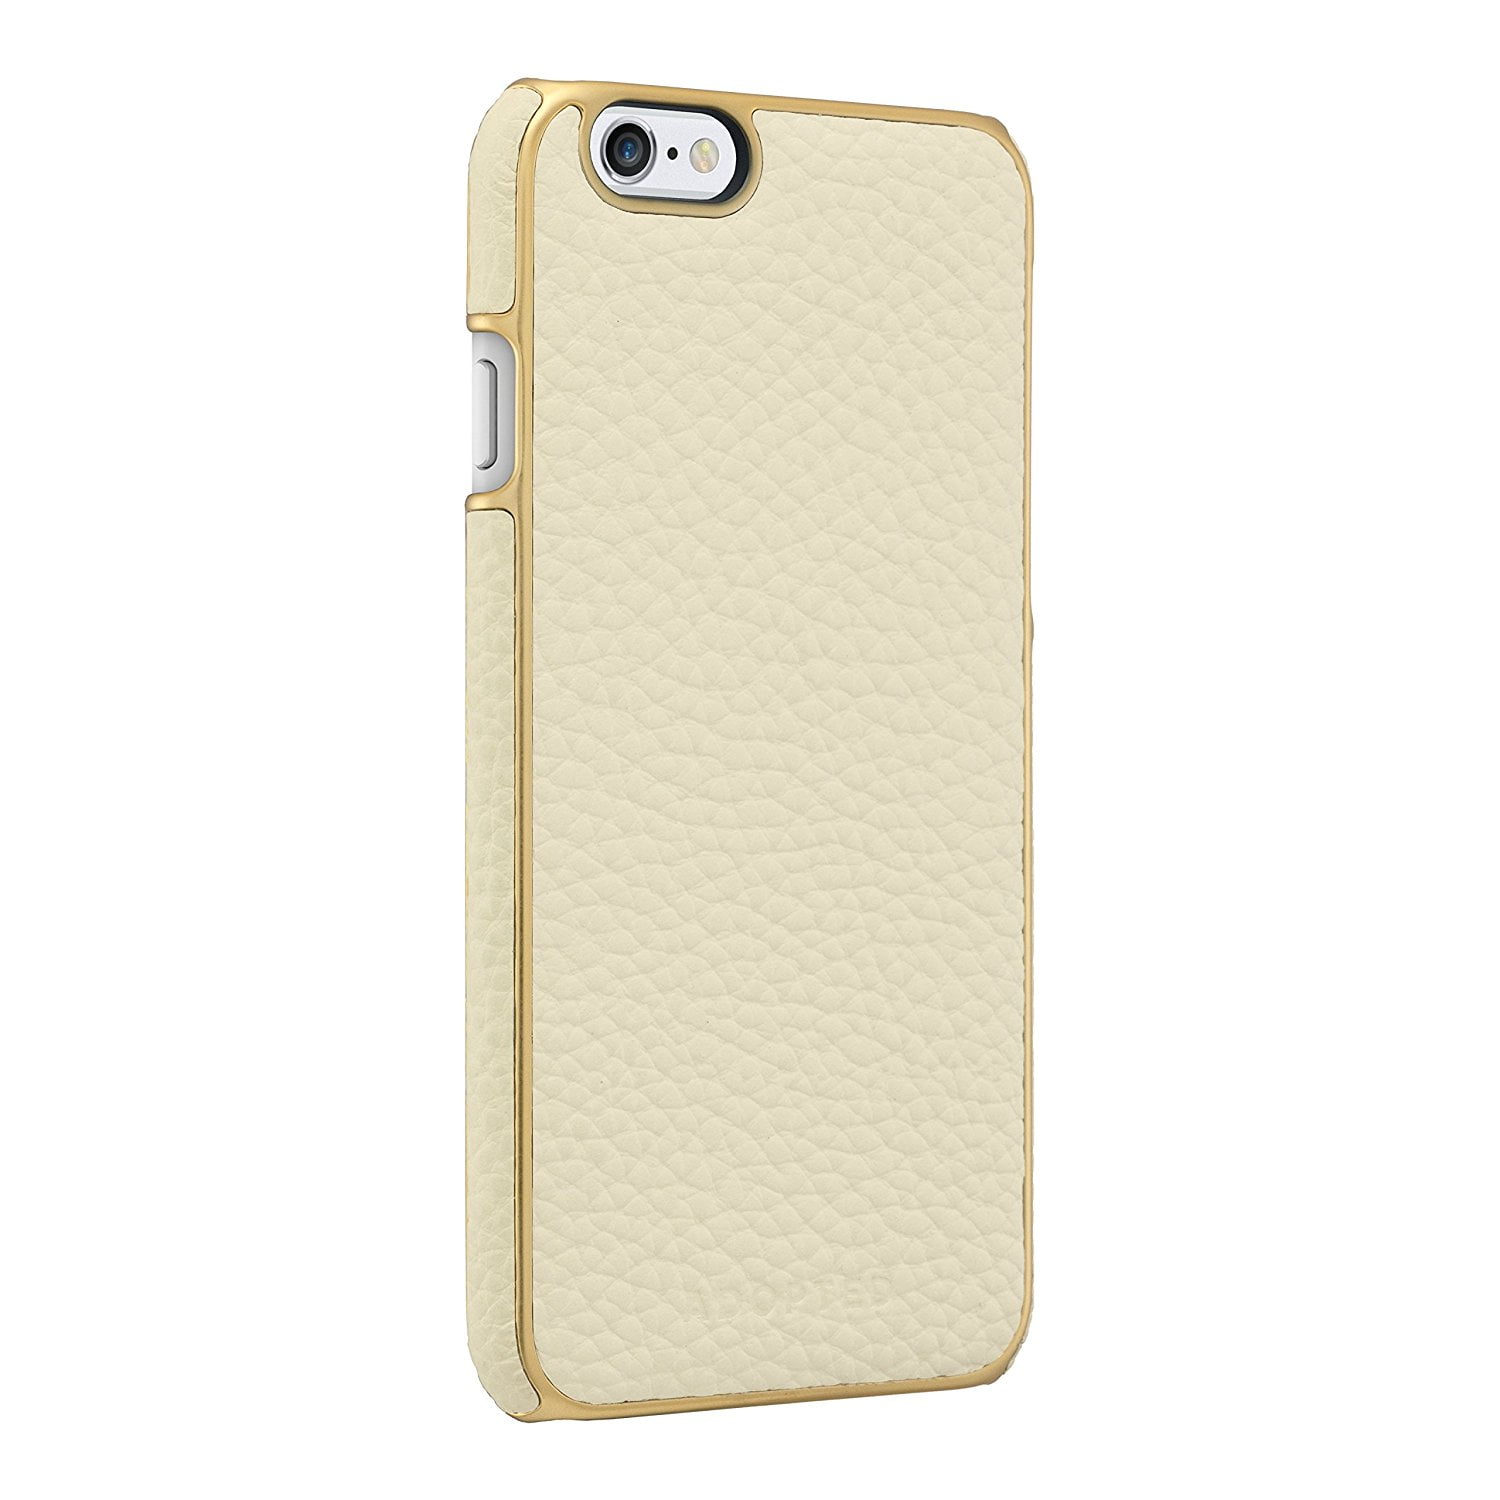 5 Pack -Adopted Leather Wrap Case Apple iPhone 6/6s - White/Gold | Walmart Canada